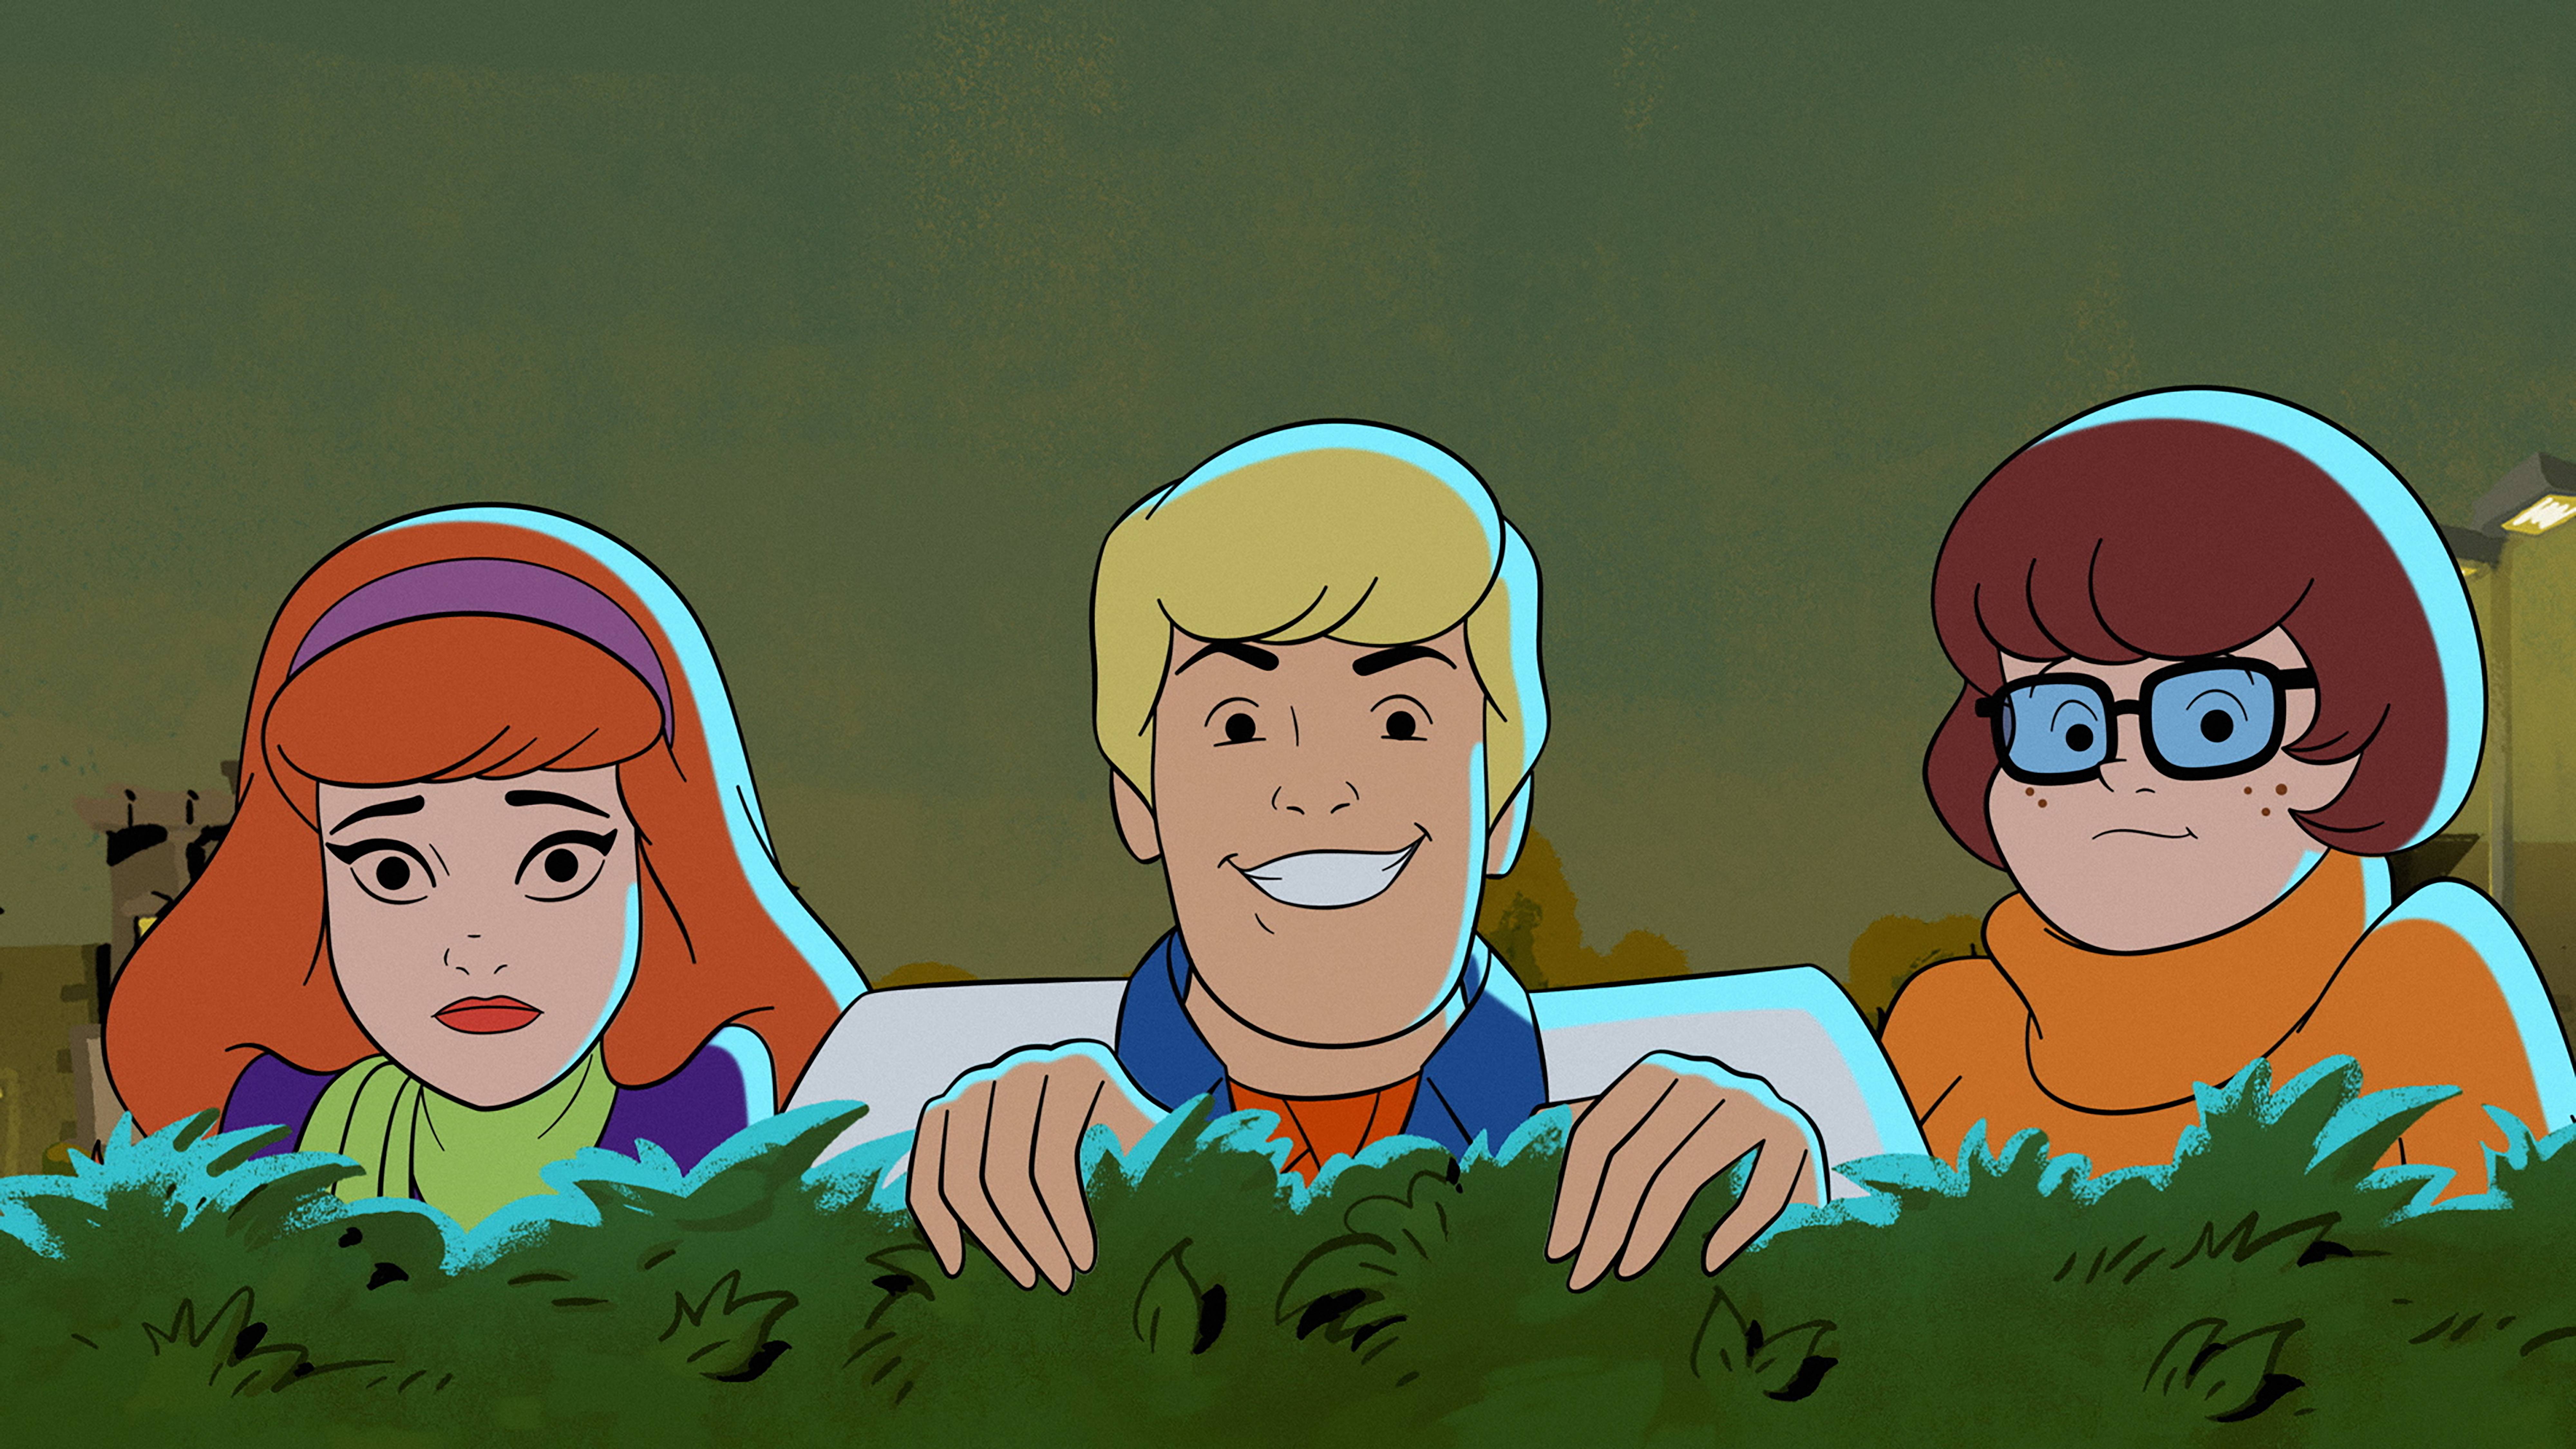 Scooby-Doo' producer confirms Velma Dinkley is a lesbian